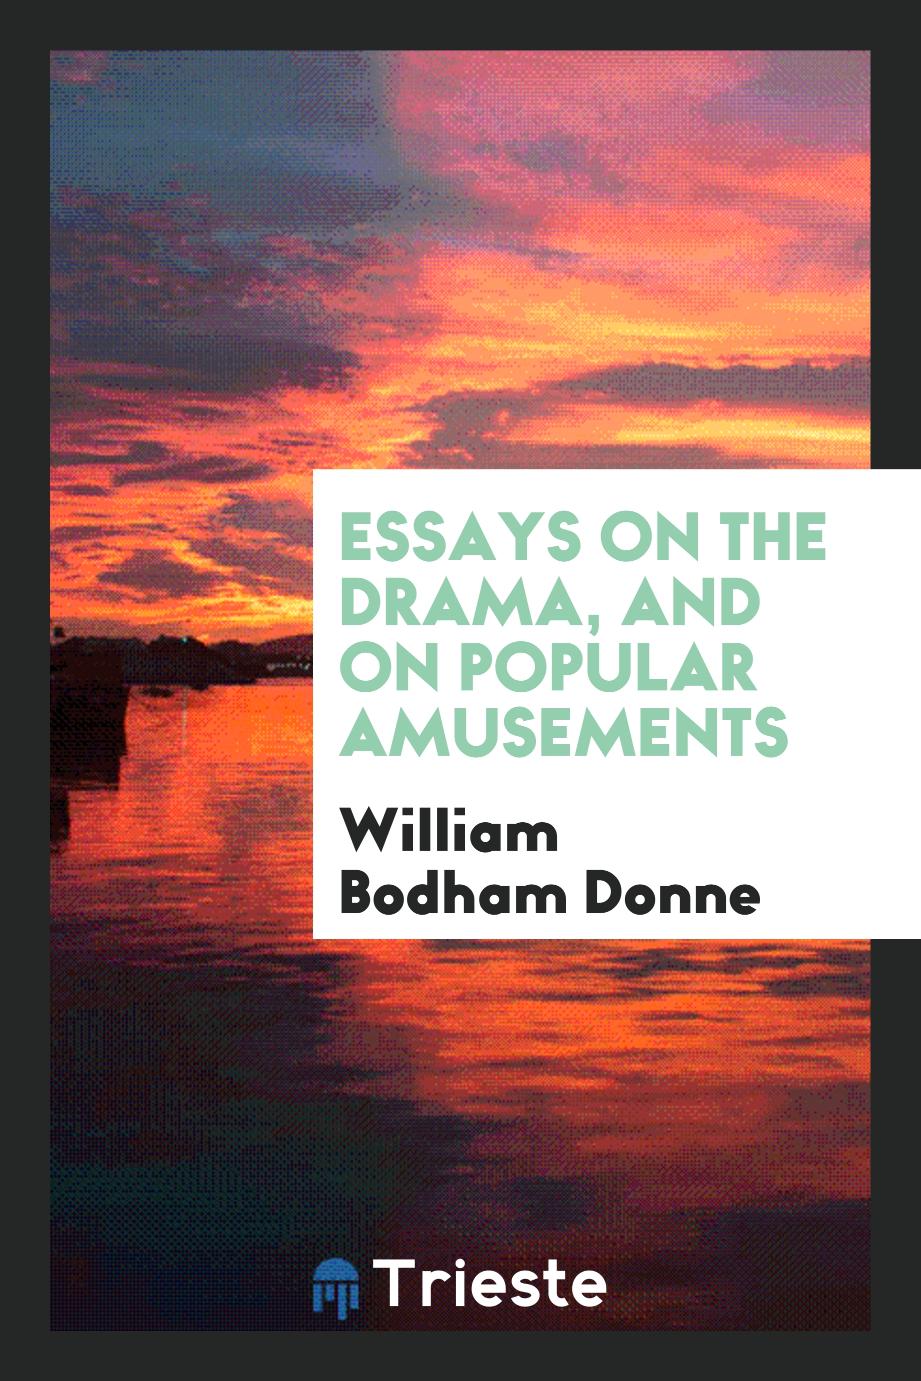 Essays on the drama, and on popular amusements